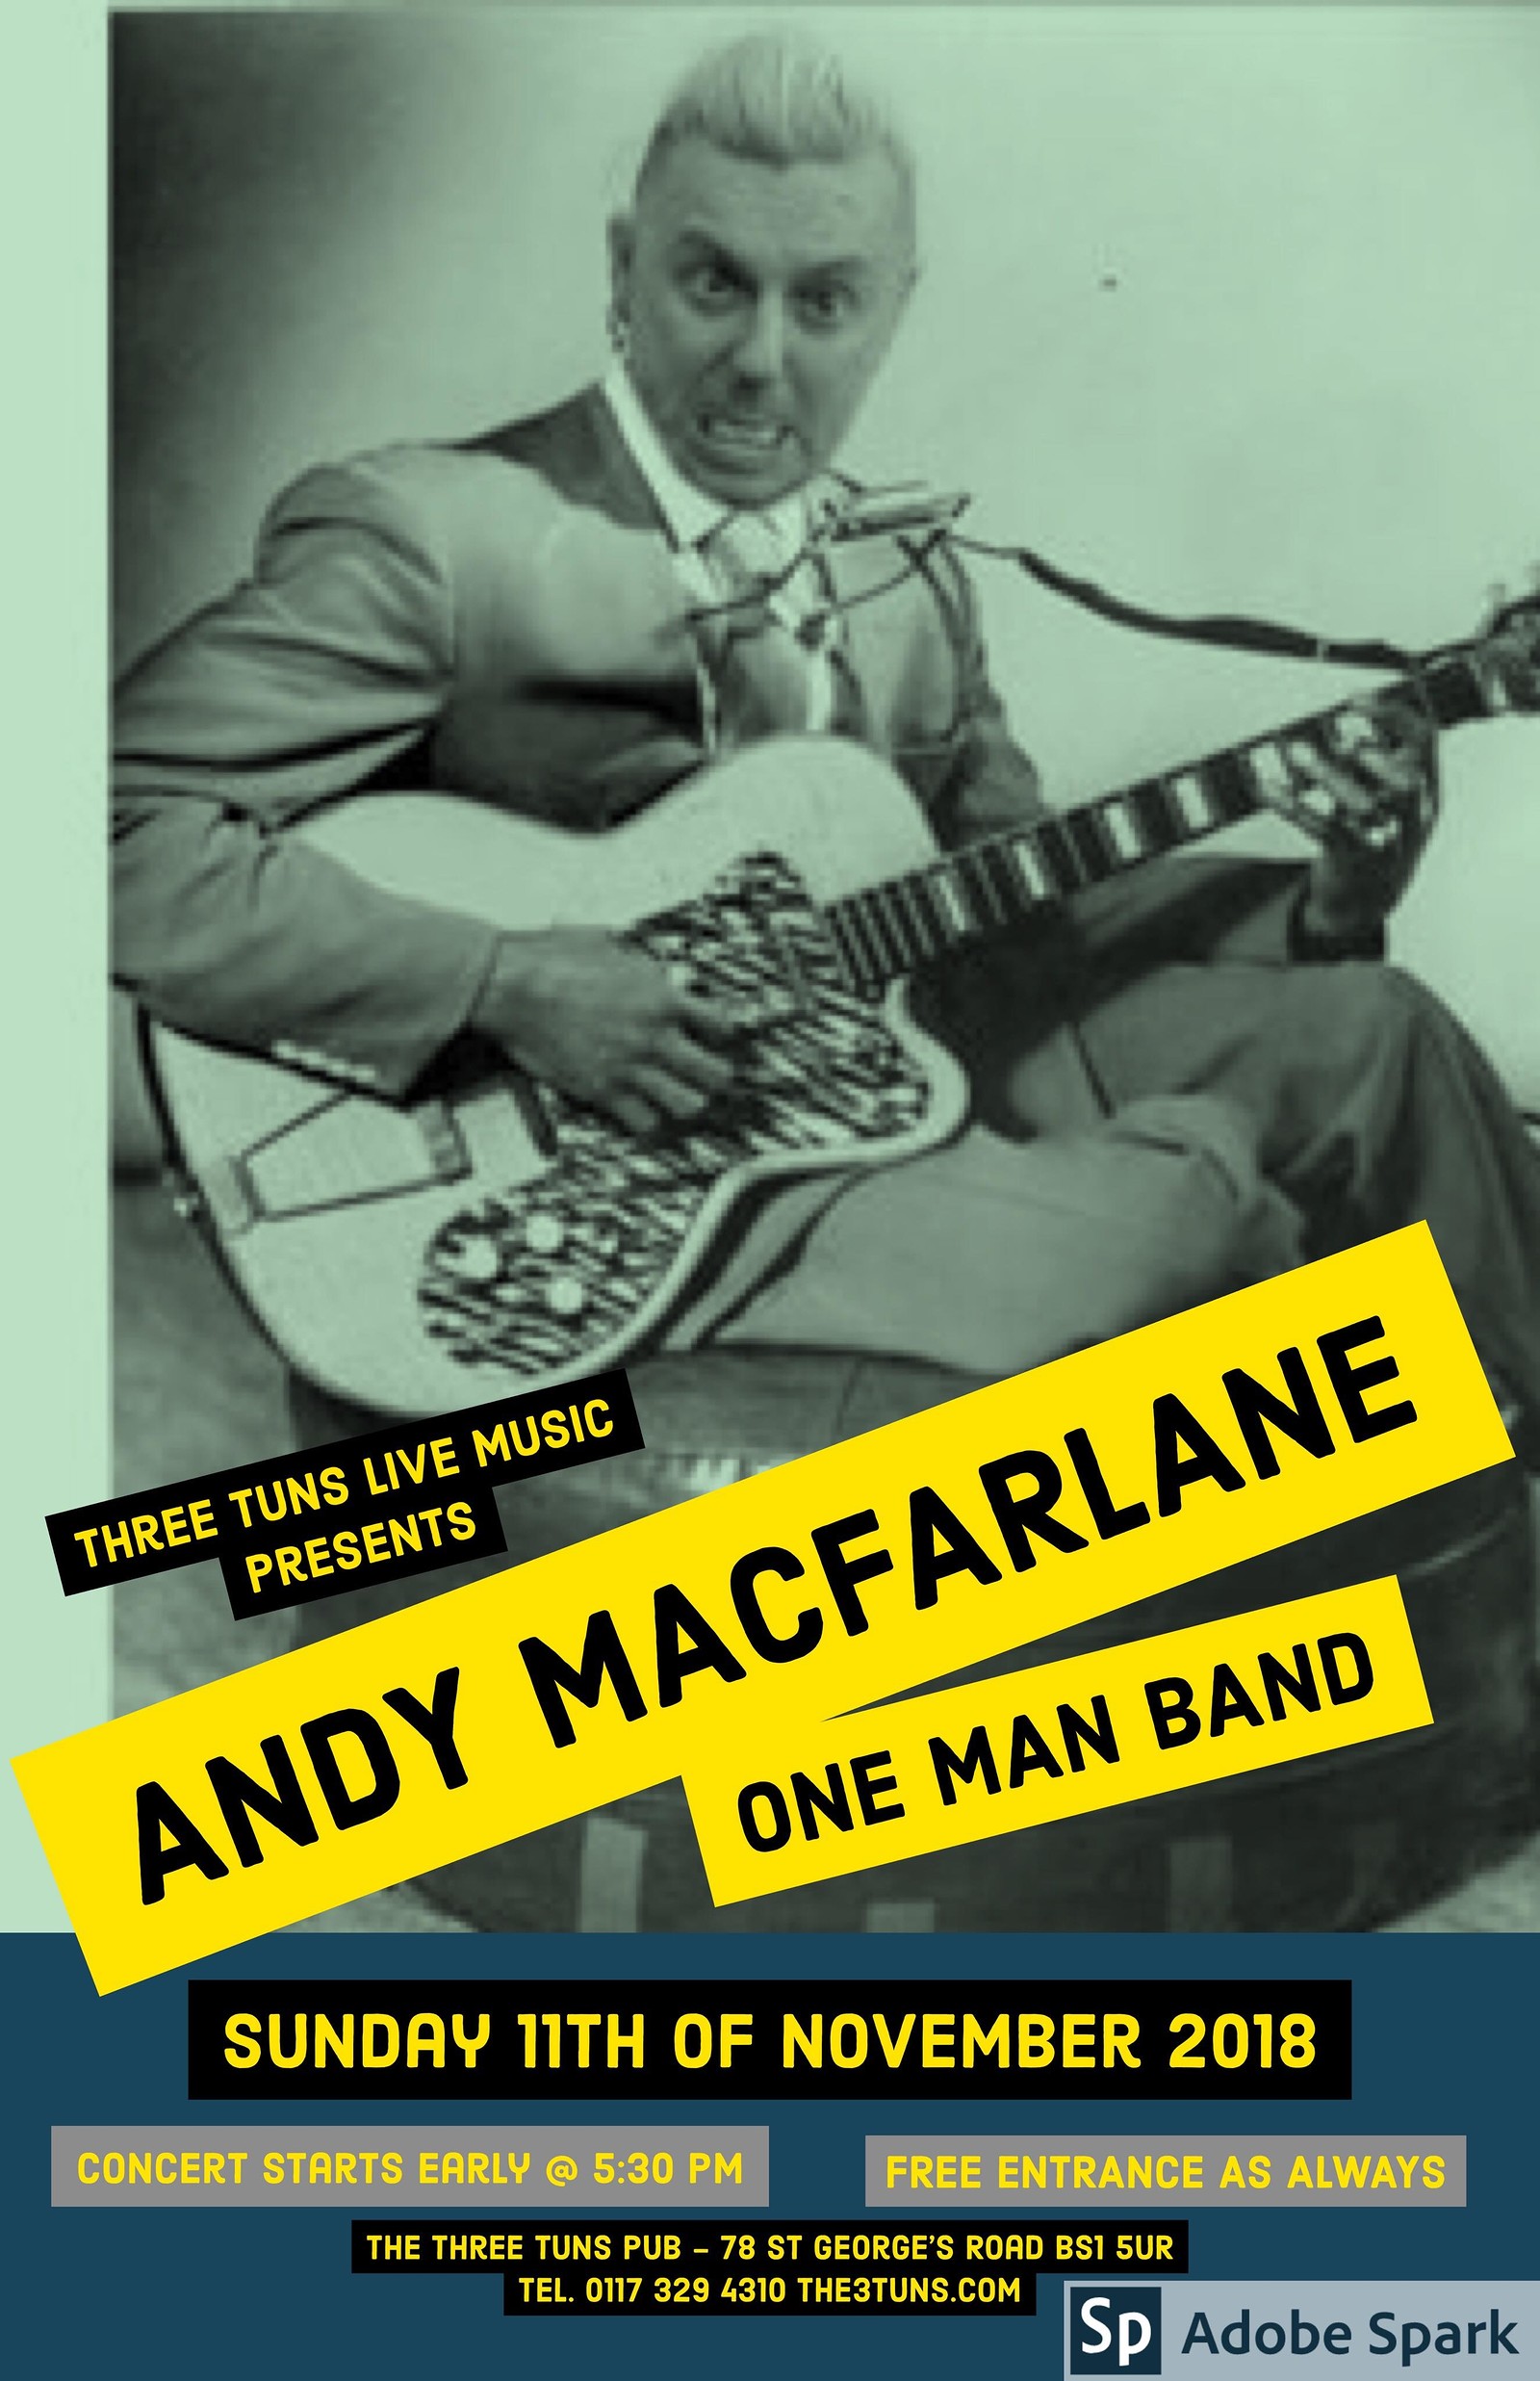 Pure Rock 'n Roll with Andy Macfarlane at The Three Tuns